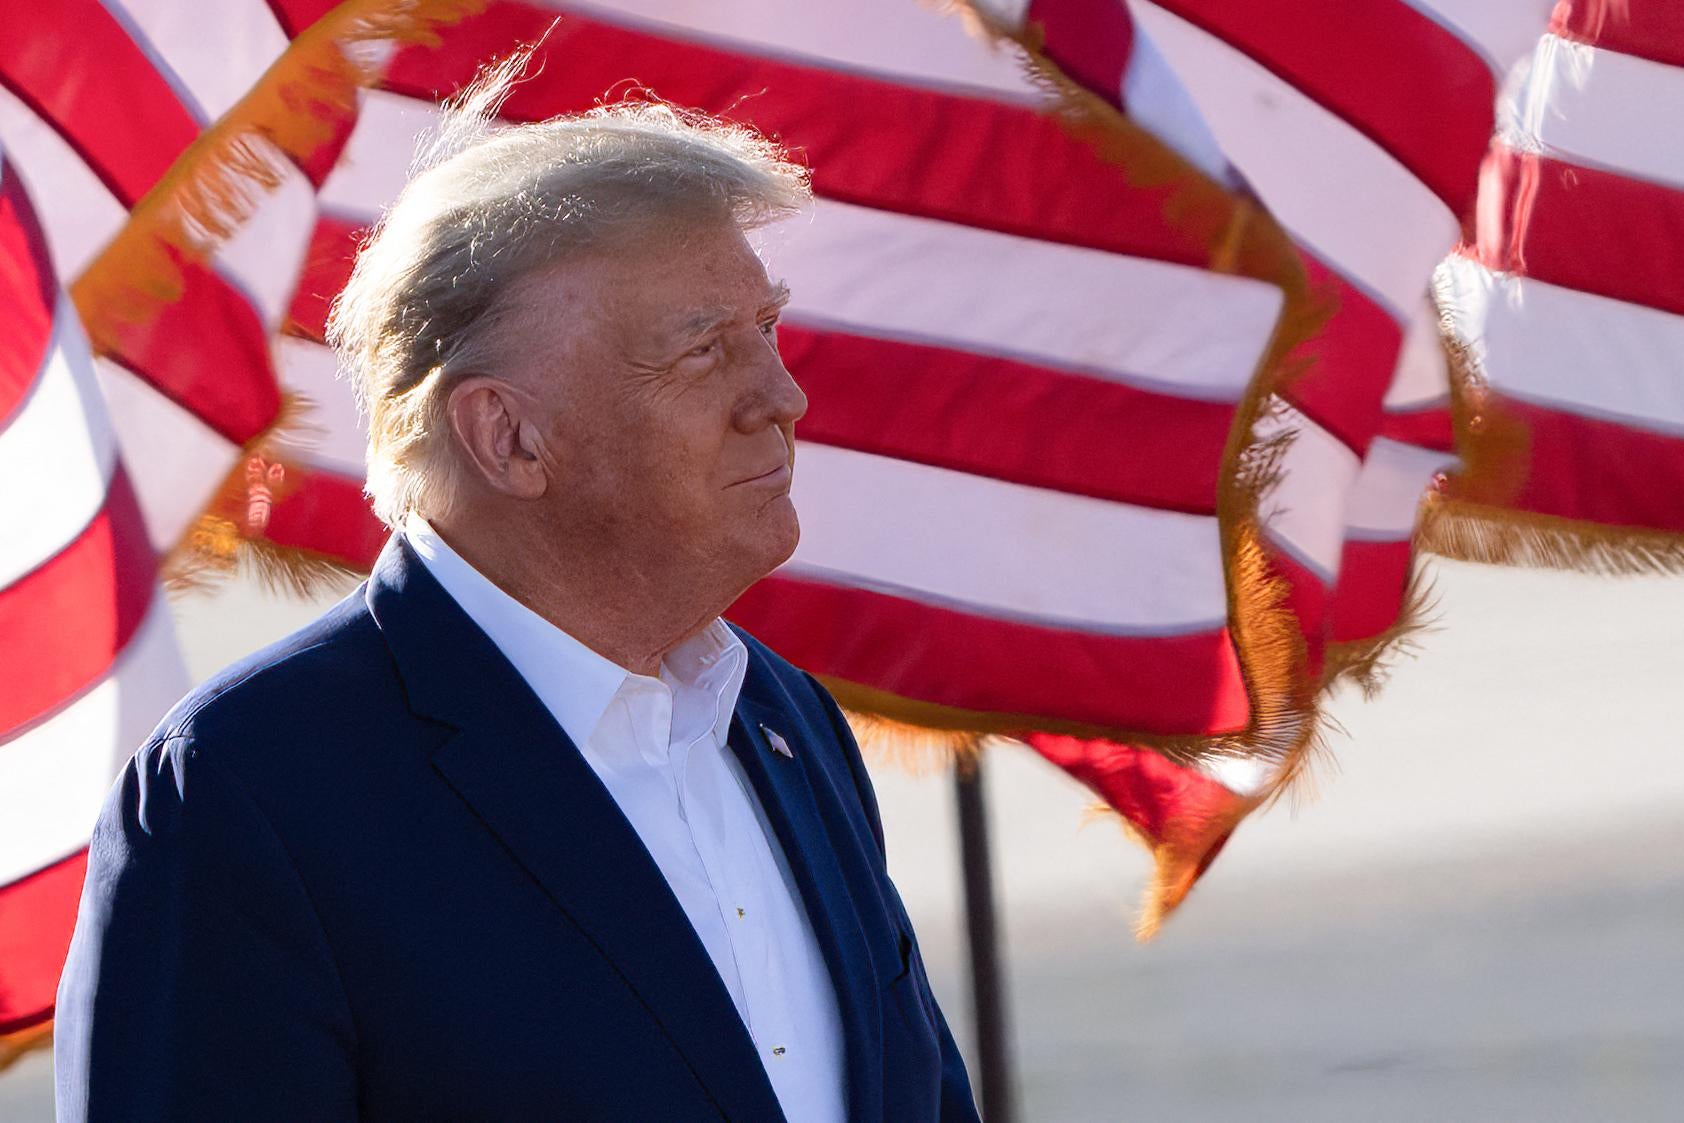 Trump is seen from the side, standing in front of a U.S. flag.